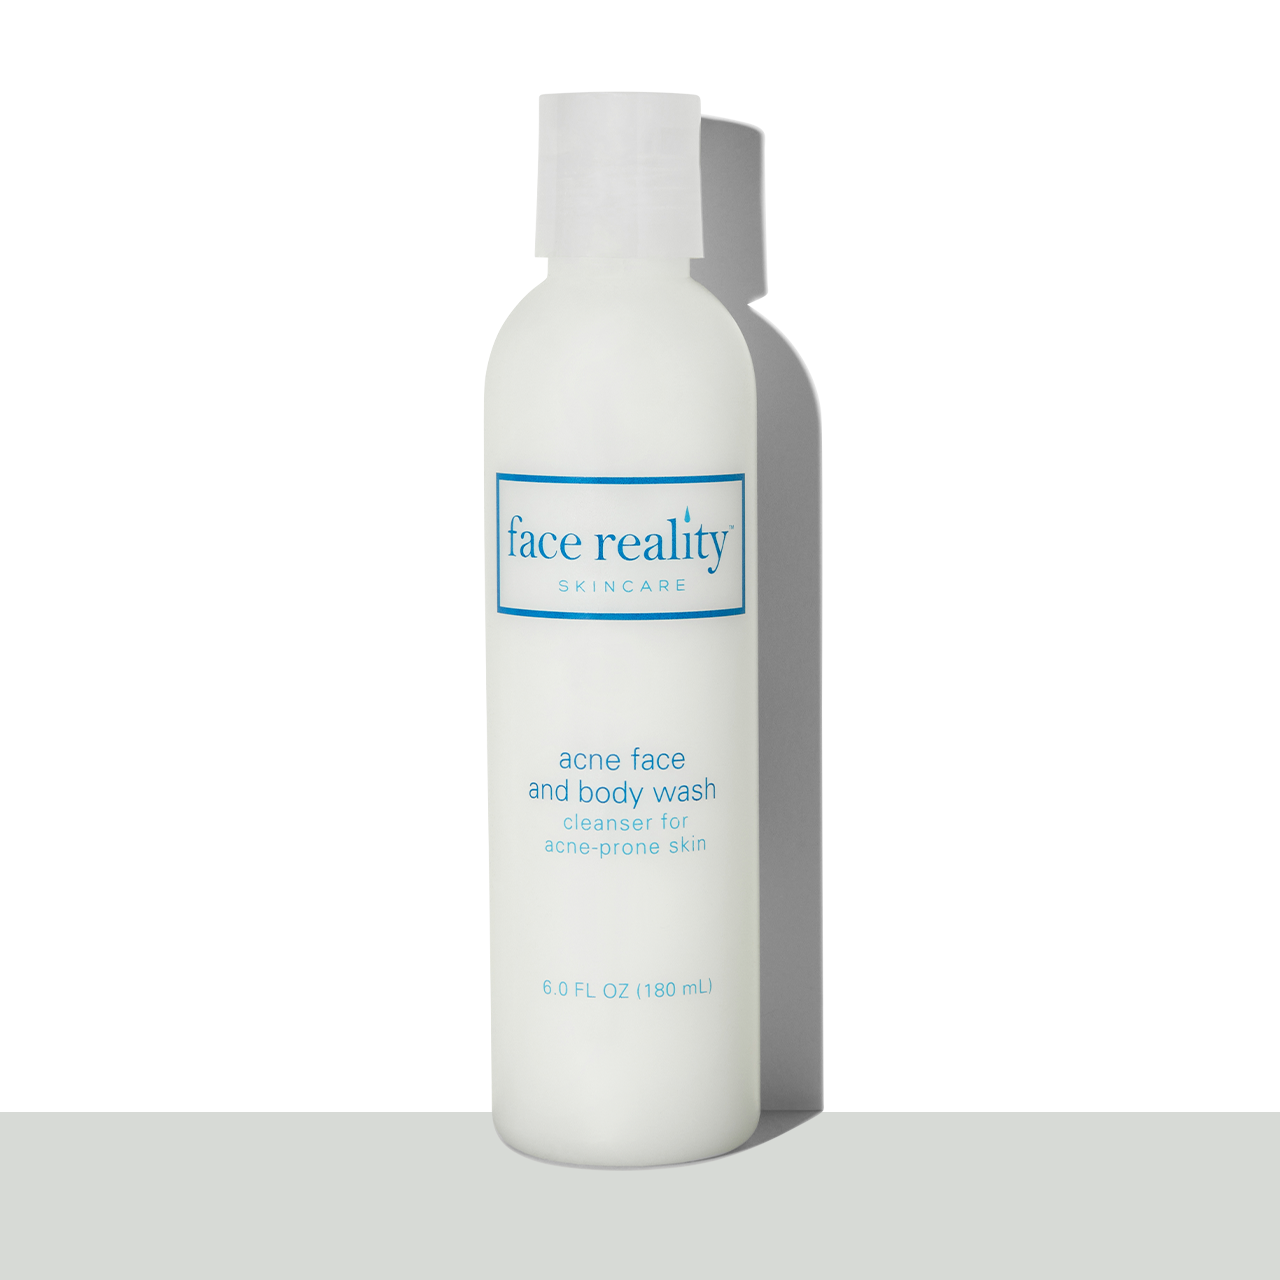 Clear six ounce bottle of Face Reality acne face and body wash in front of a white background on a grey surface